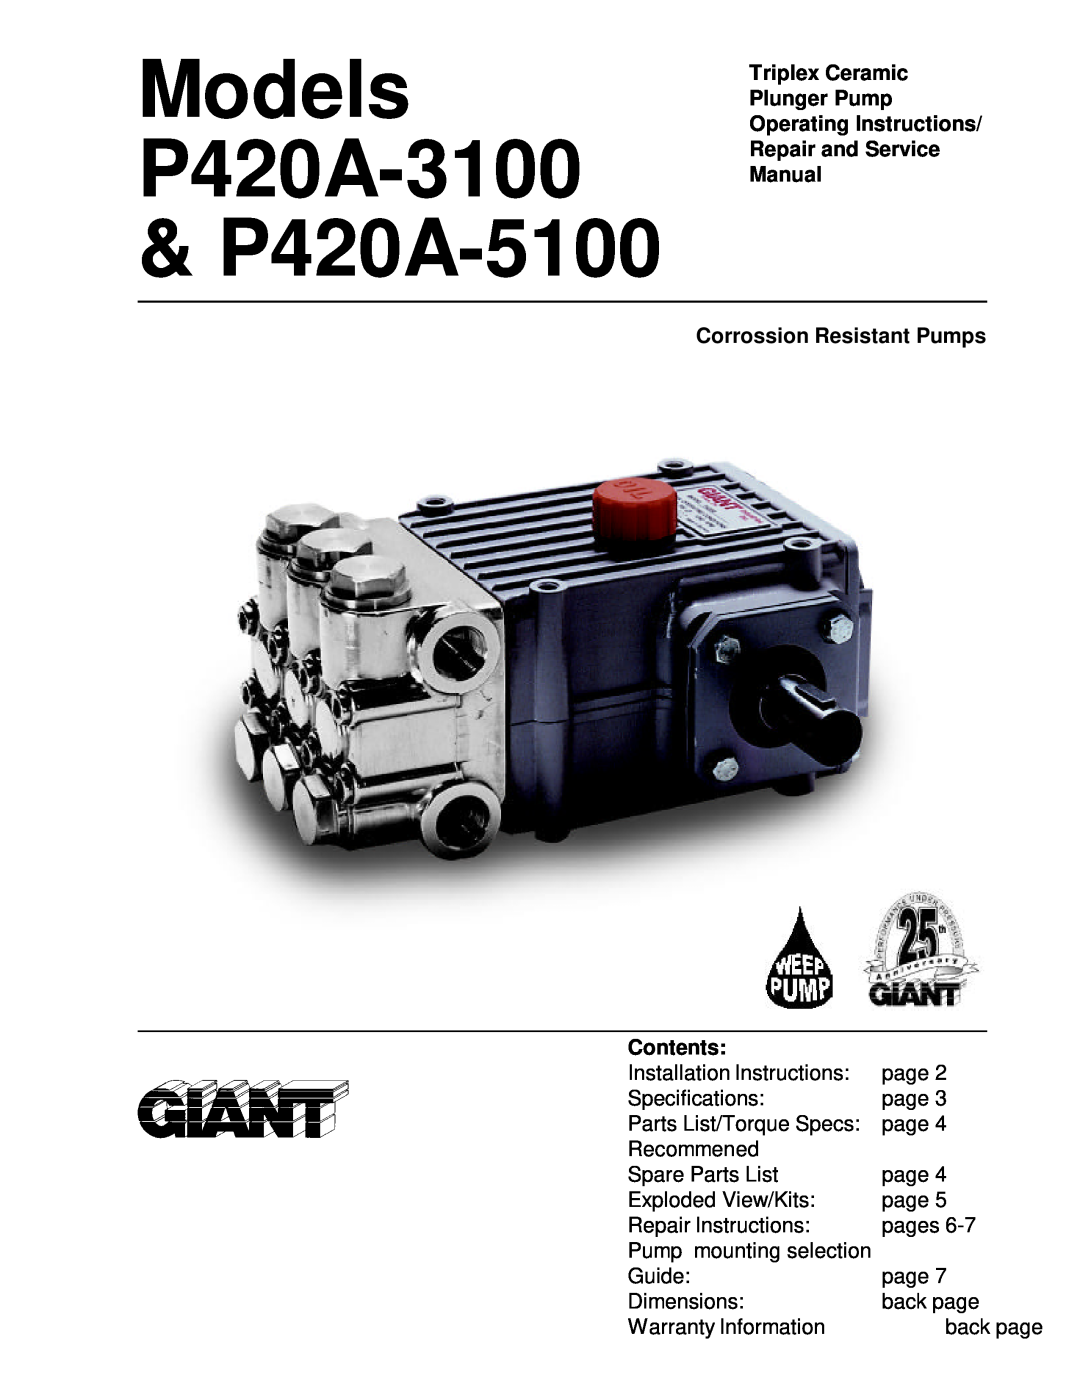 Giant P420A-3100 operating instructions Triplex Ceramic Plunger Pump Operating Instructions, Contents 